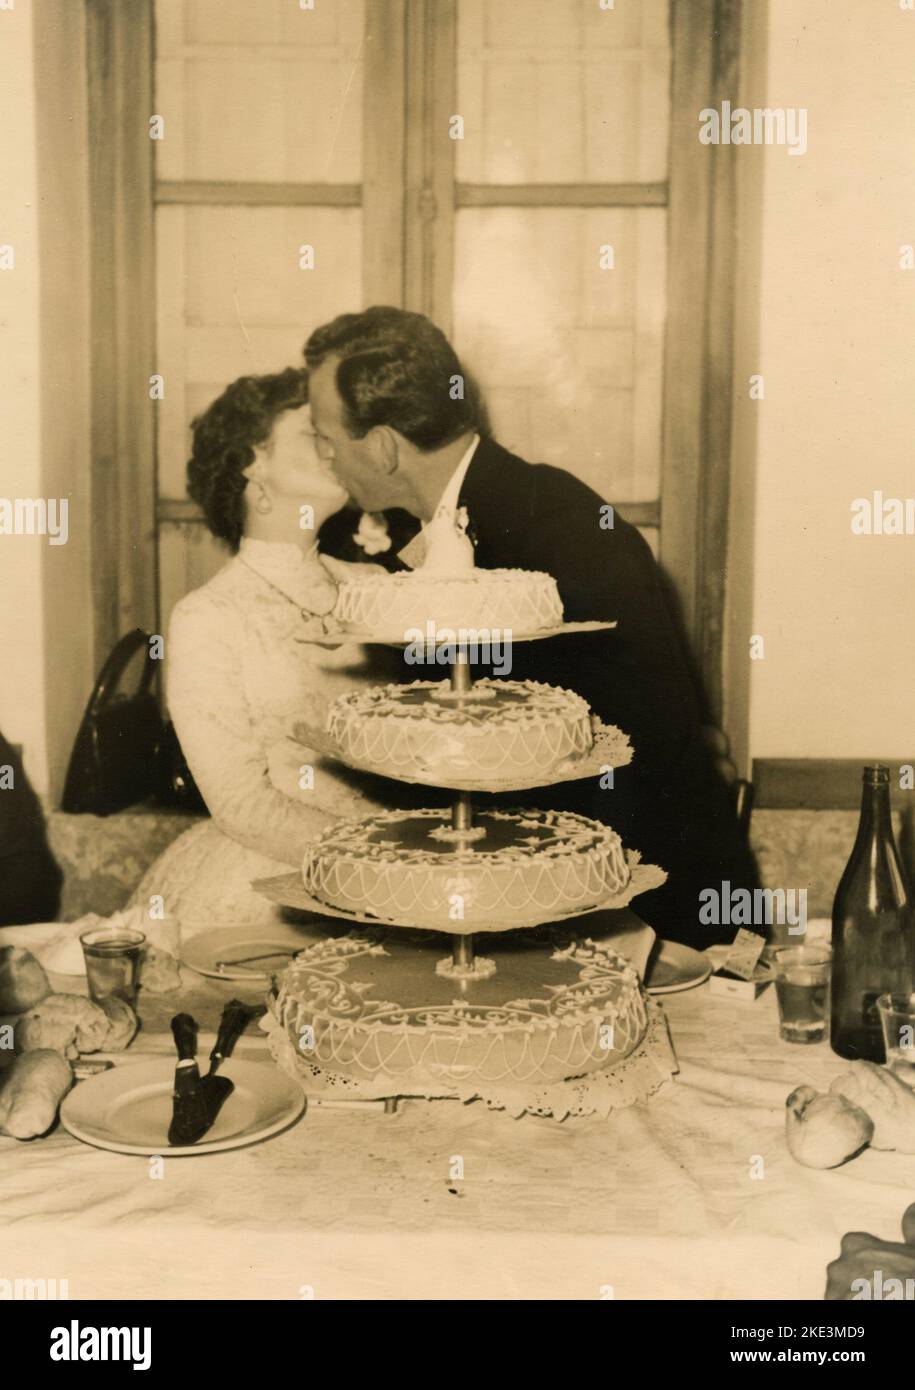 Wedding in a village in central Italy: The Bride and the Groom kissing with the cake, 1950s Stock Photo